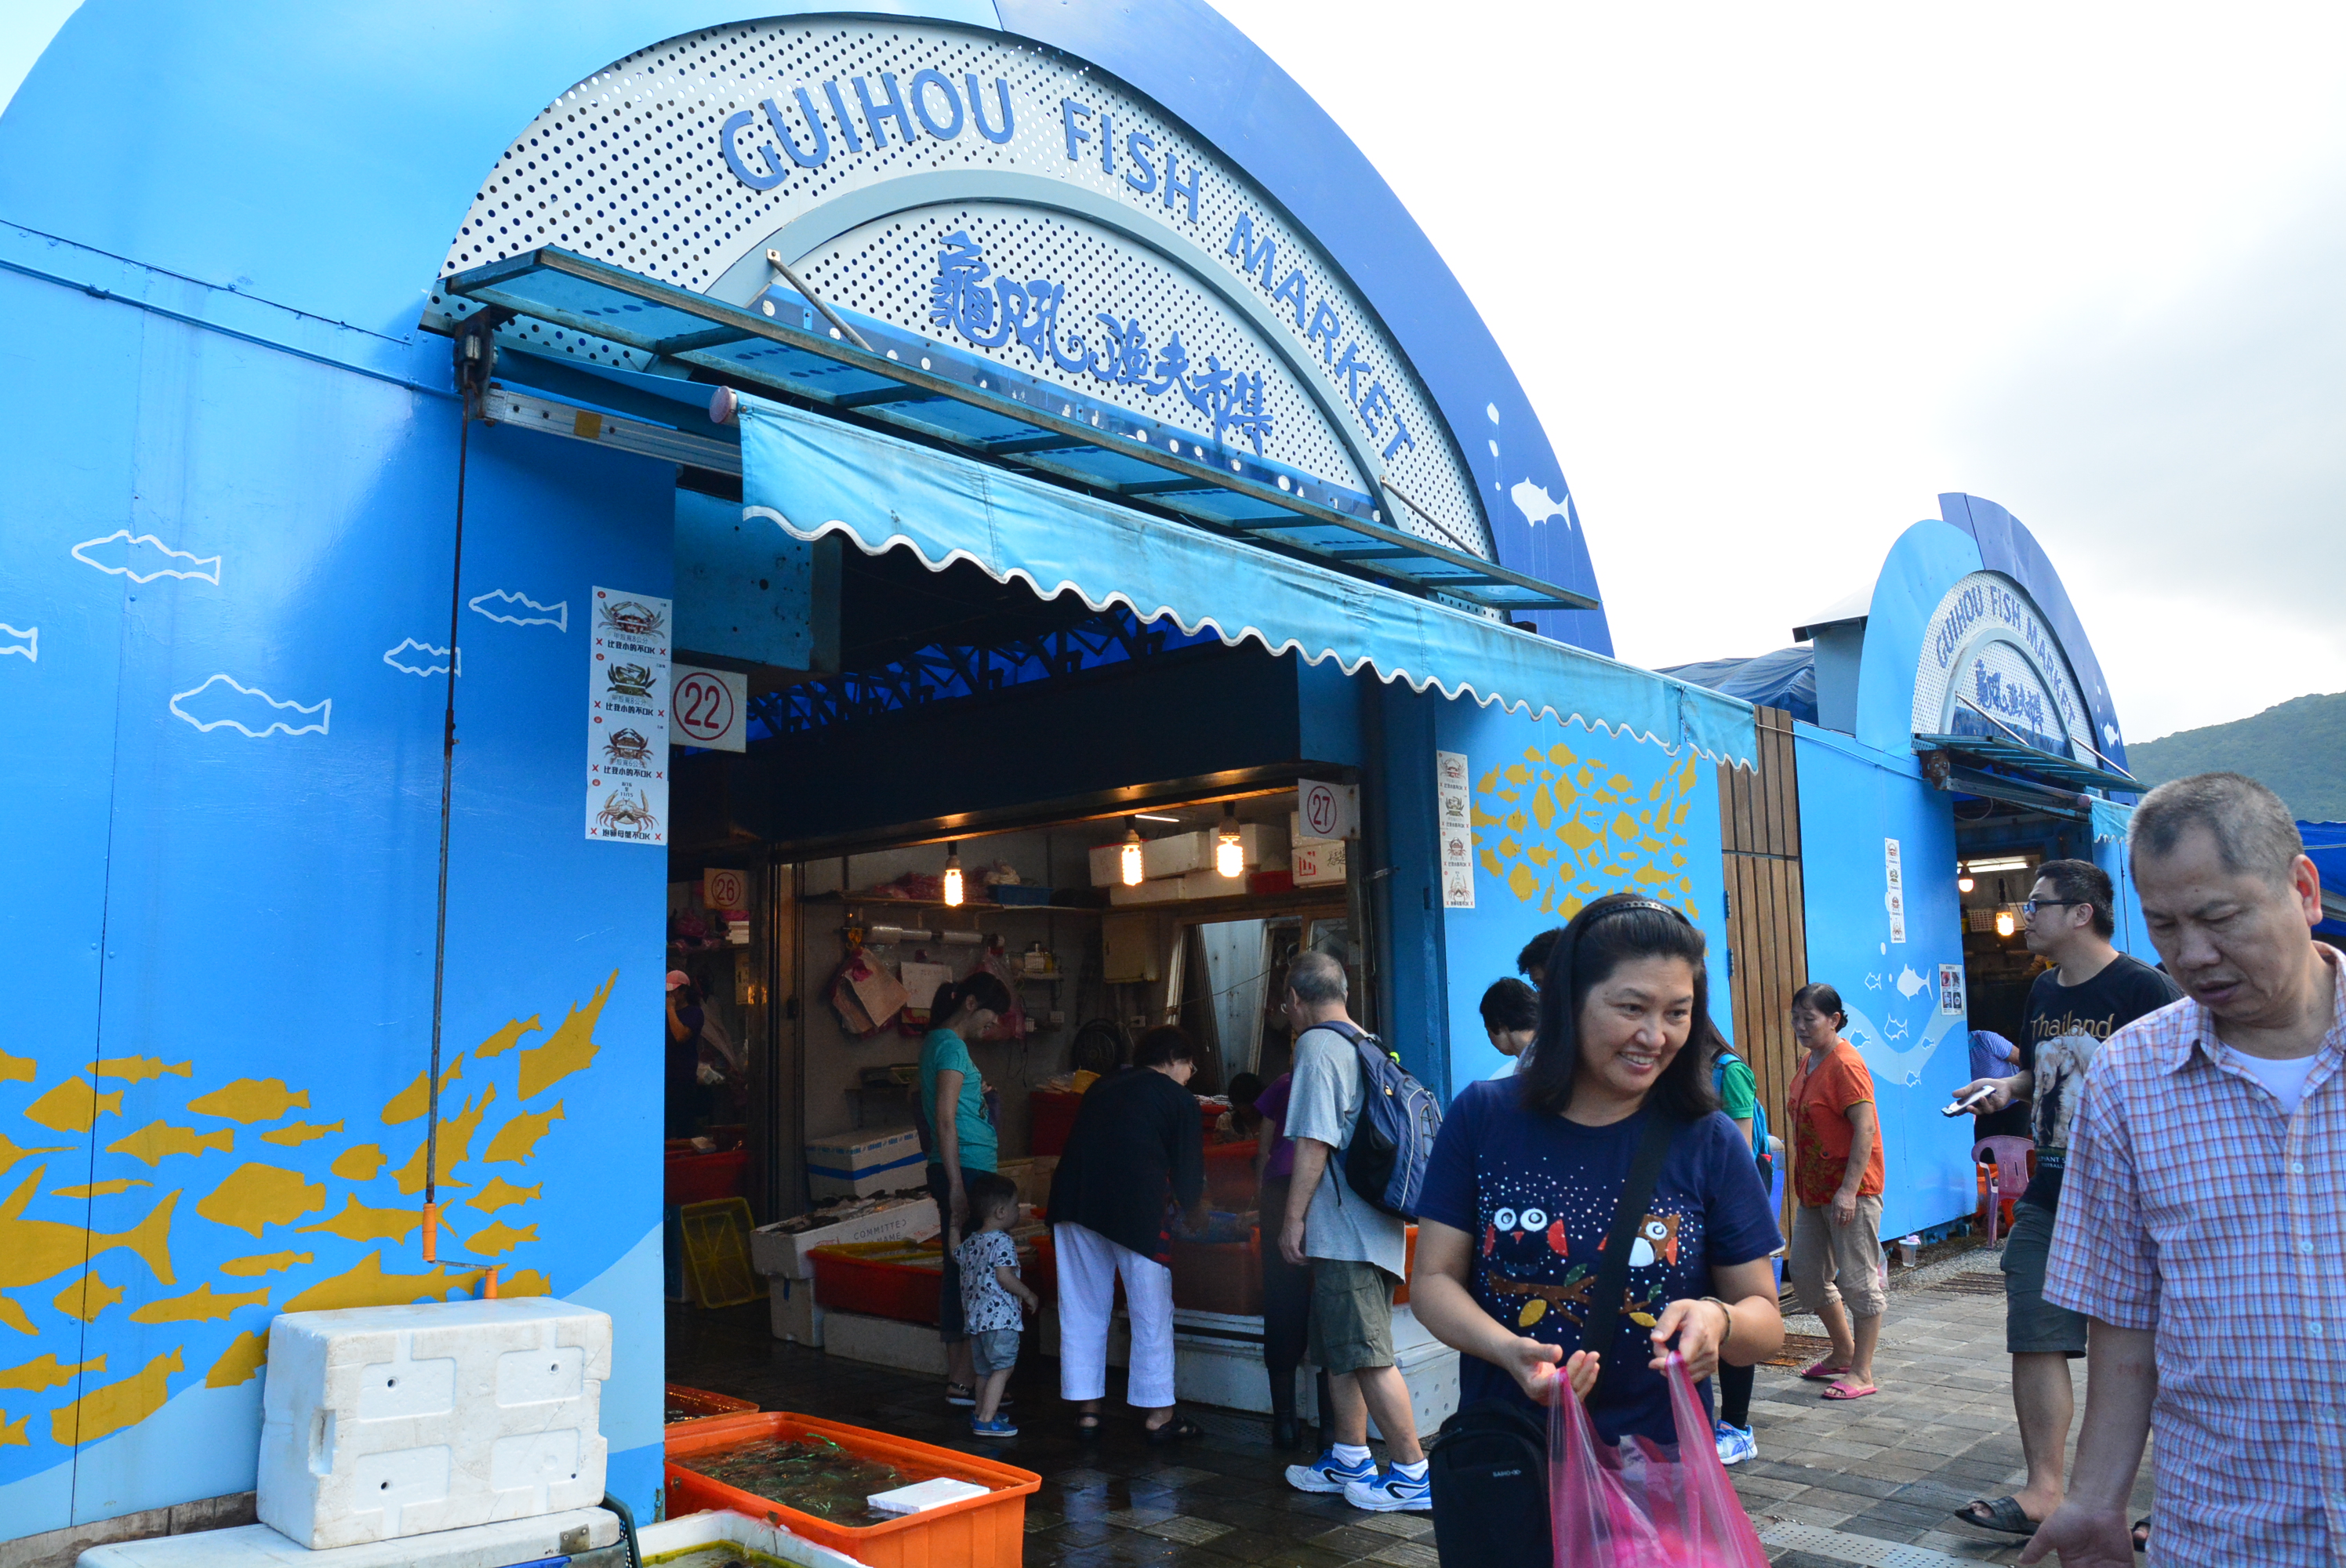 Guihou Fishermen Market is a good place for tasting fresh seafood in North Coast